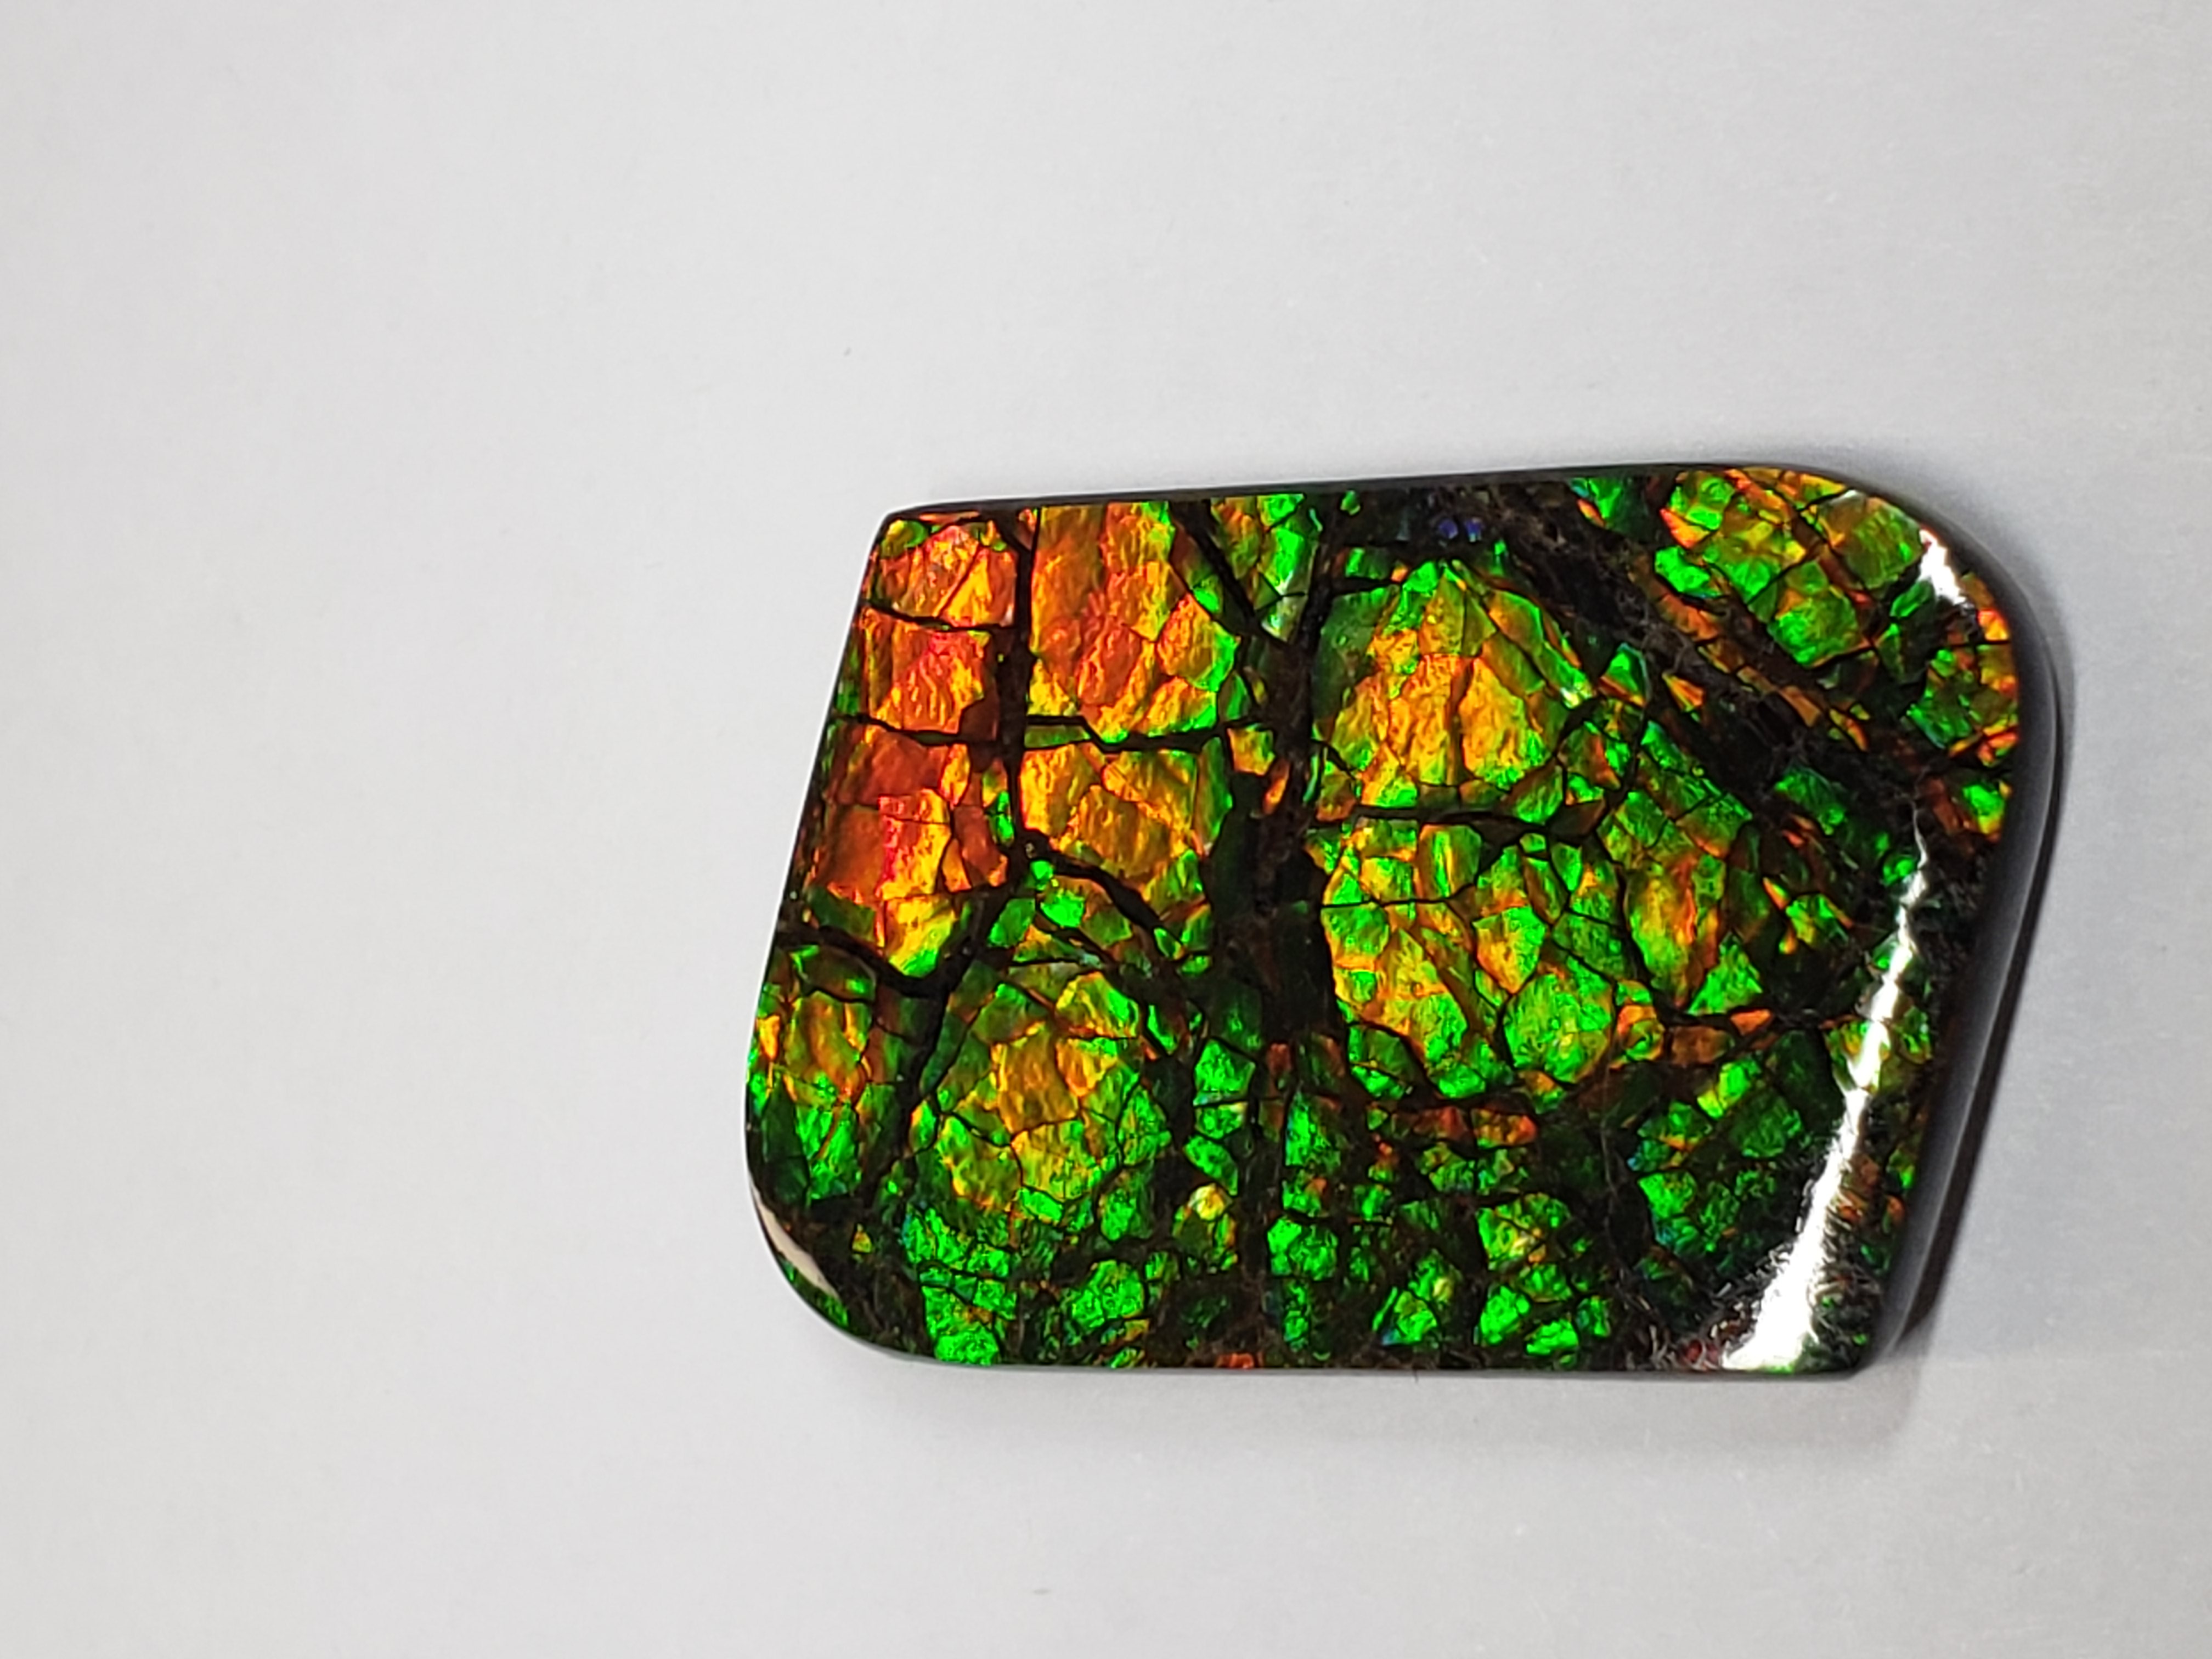 27x19 Ammolite Canada's Opal Natural Free Form 2 Color Green & Gold Gemstone